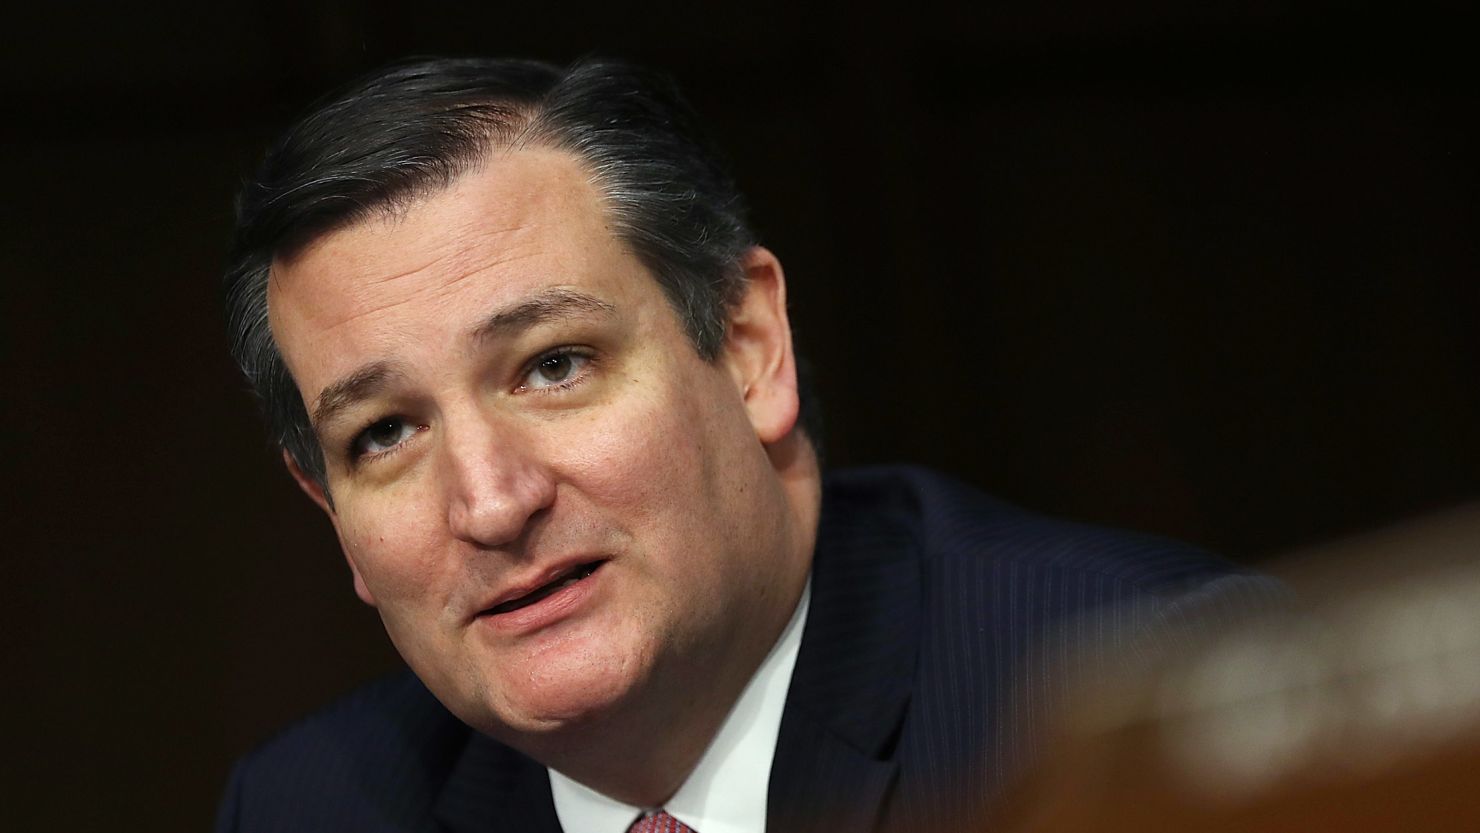 Sen. Ted Cruz, a Texas Republican, speaks during a hearing for Judge Neil Gorsuch before the Senate Judiciary Committee in the Hart Senate Office Building on Capitol Hill March 20, 2017 in Washington, DC.